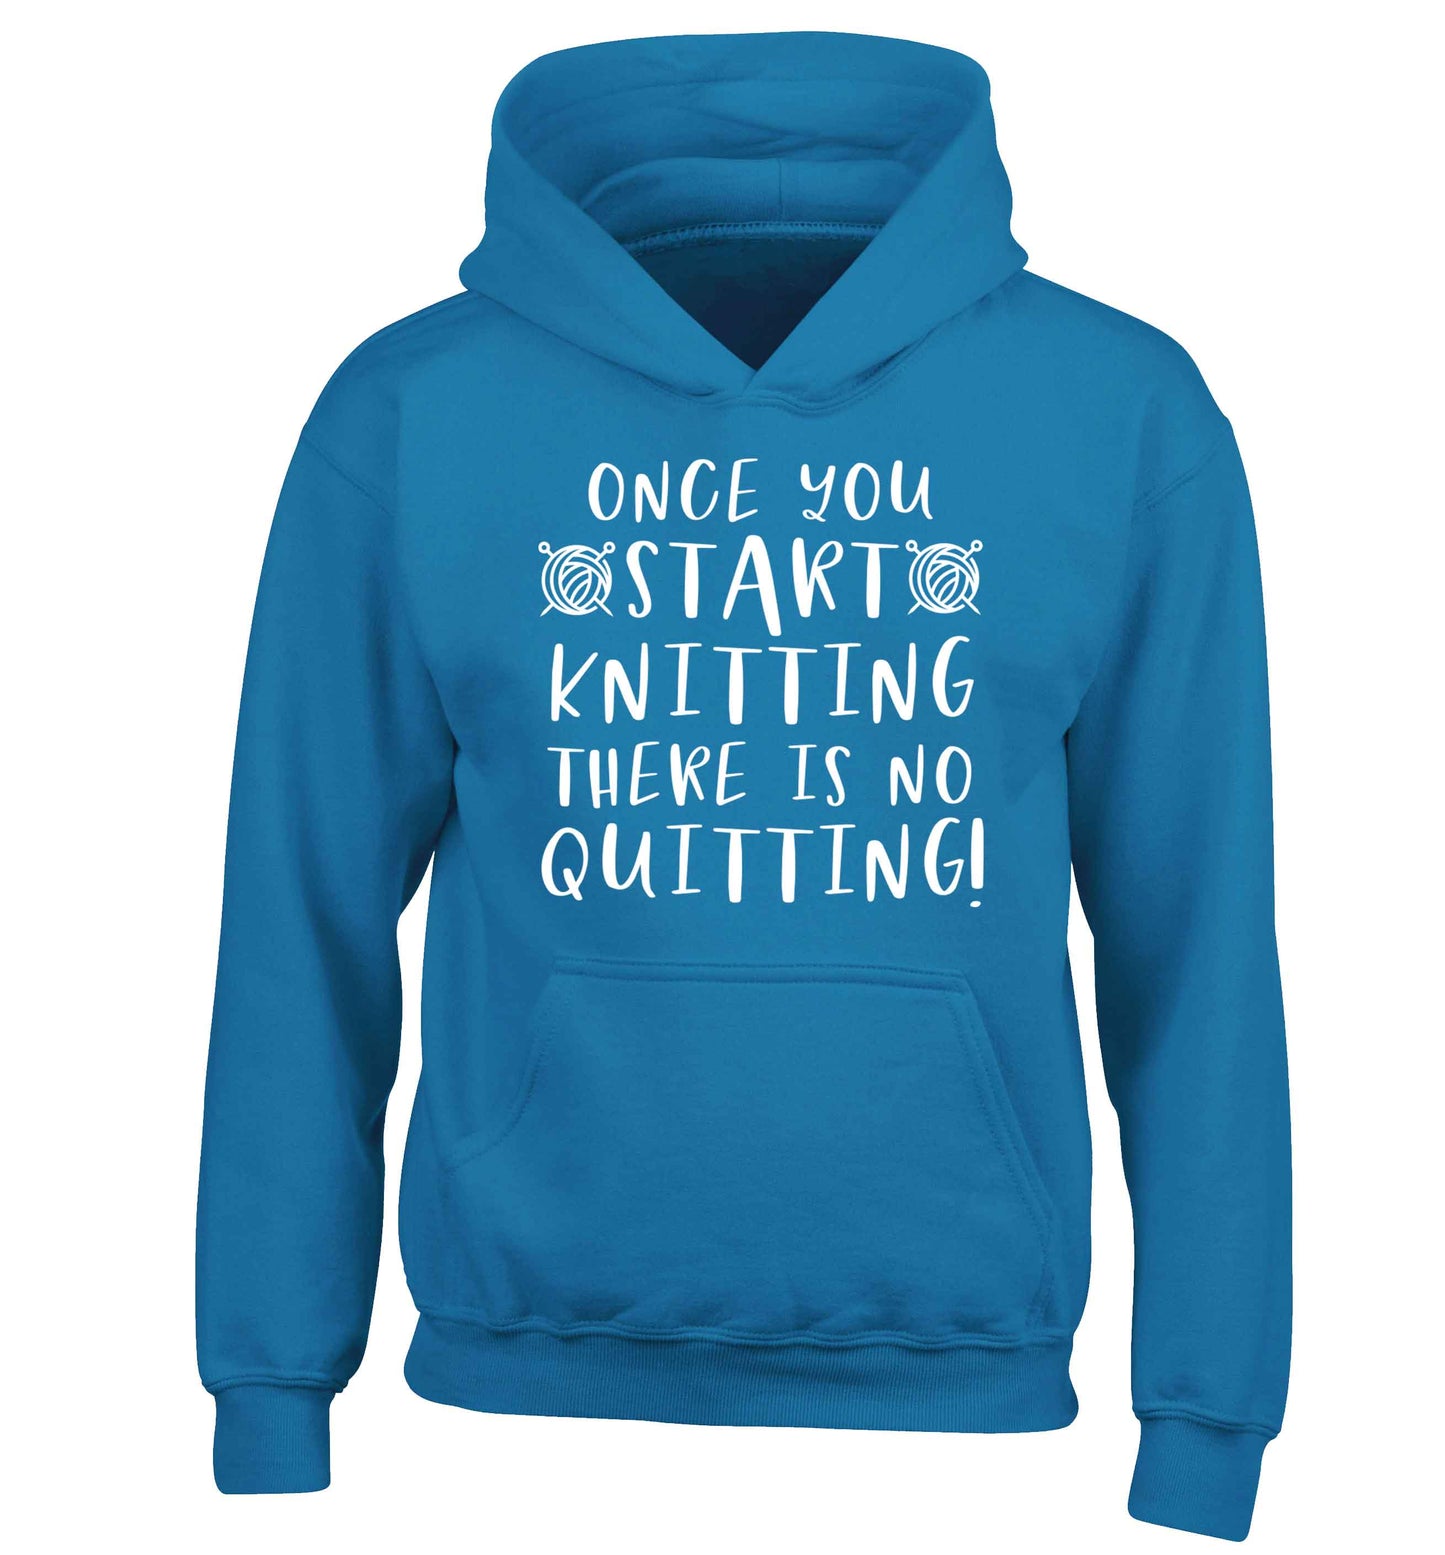 Once you start knitting there is no quitting! children's blue hoodie 12-13 Years